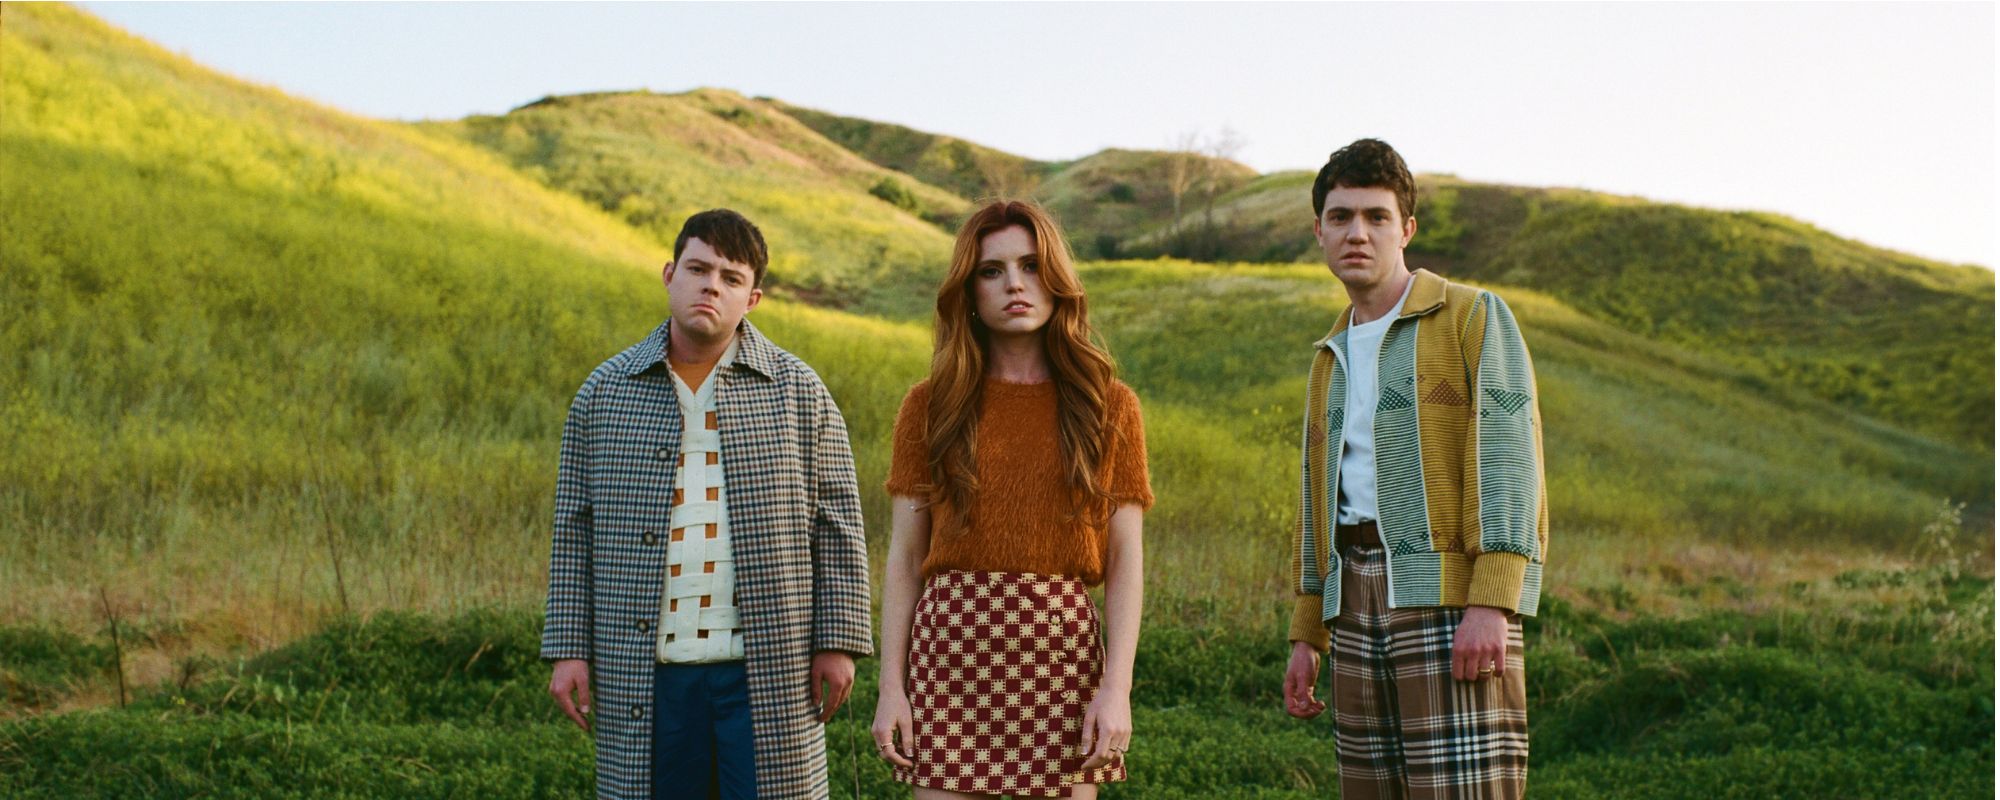 Echosmith Gets Candid on Self-Titled Album Track By Track